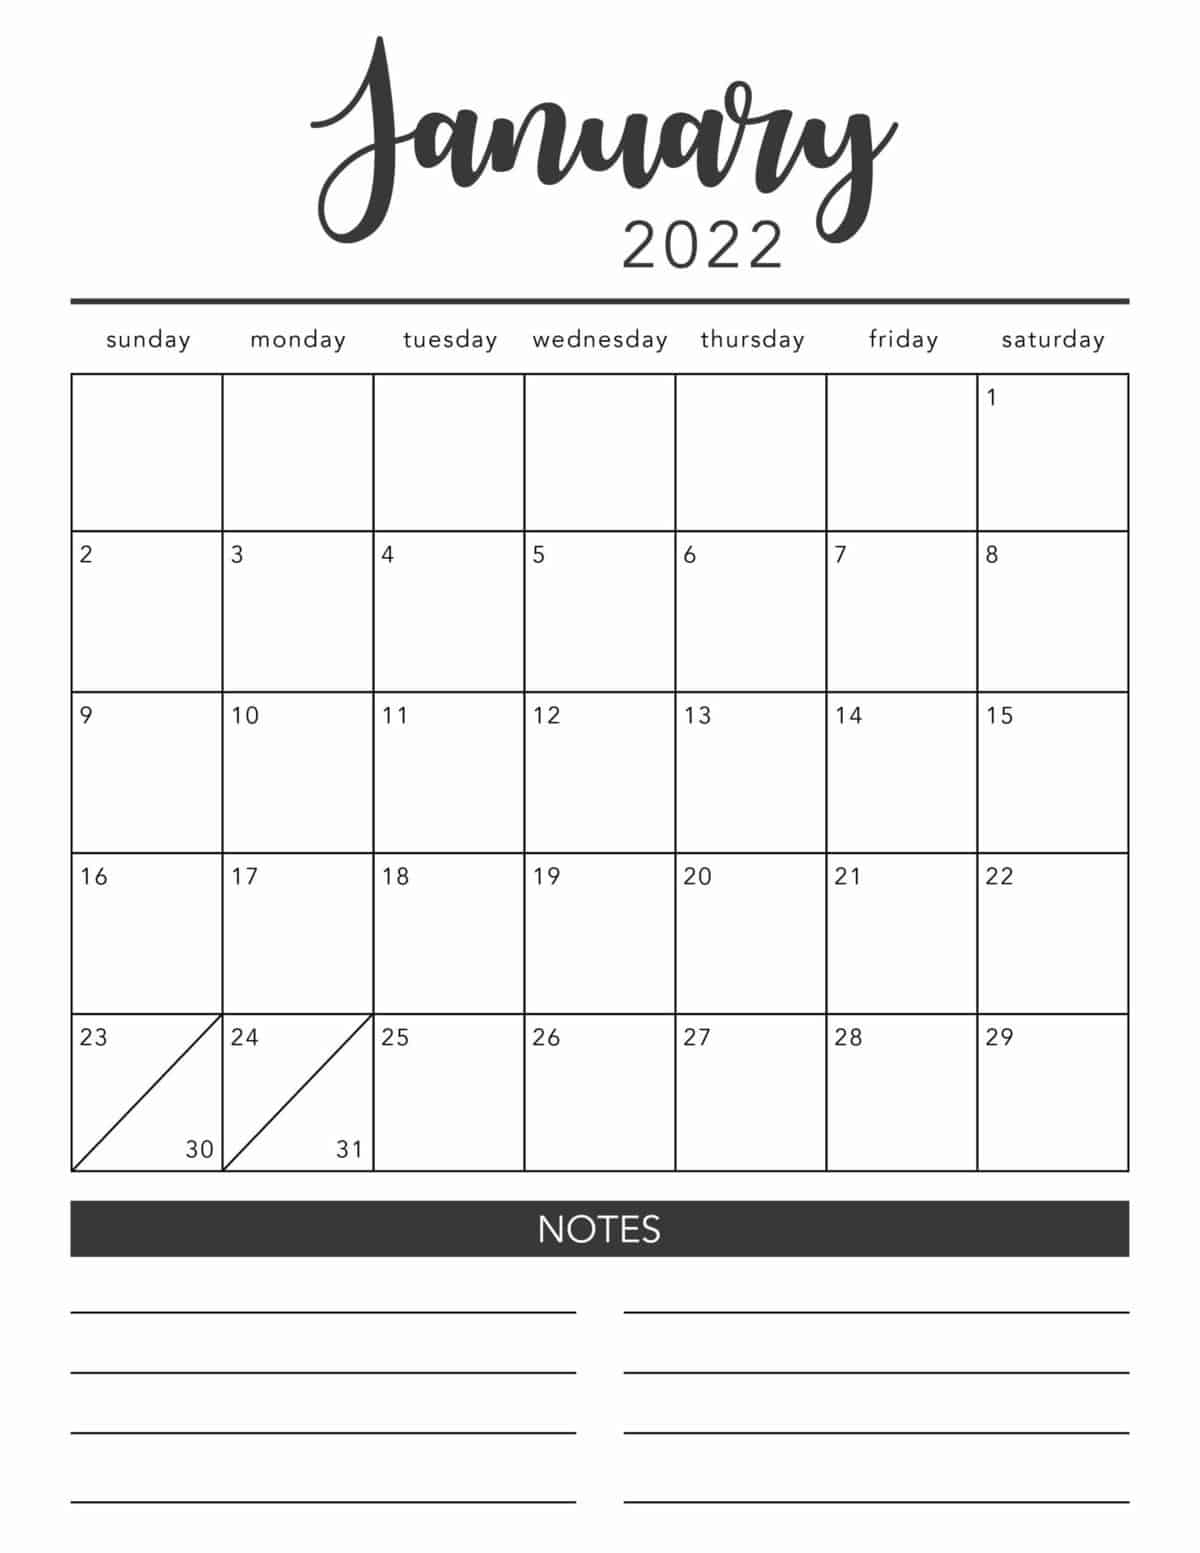 Free Download Monthly Calendar 2022 Free 2022 Printable Calendar Template (2 Colors!) - I Heart Naptime